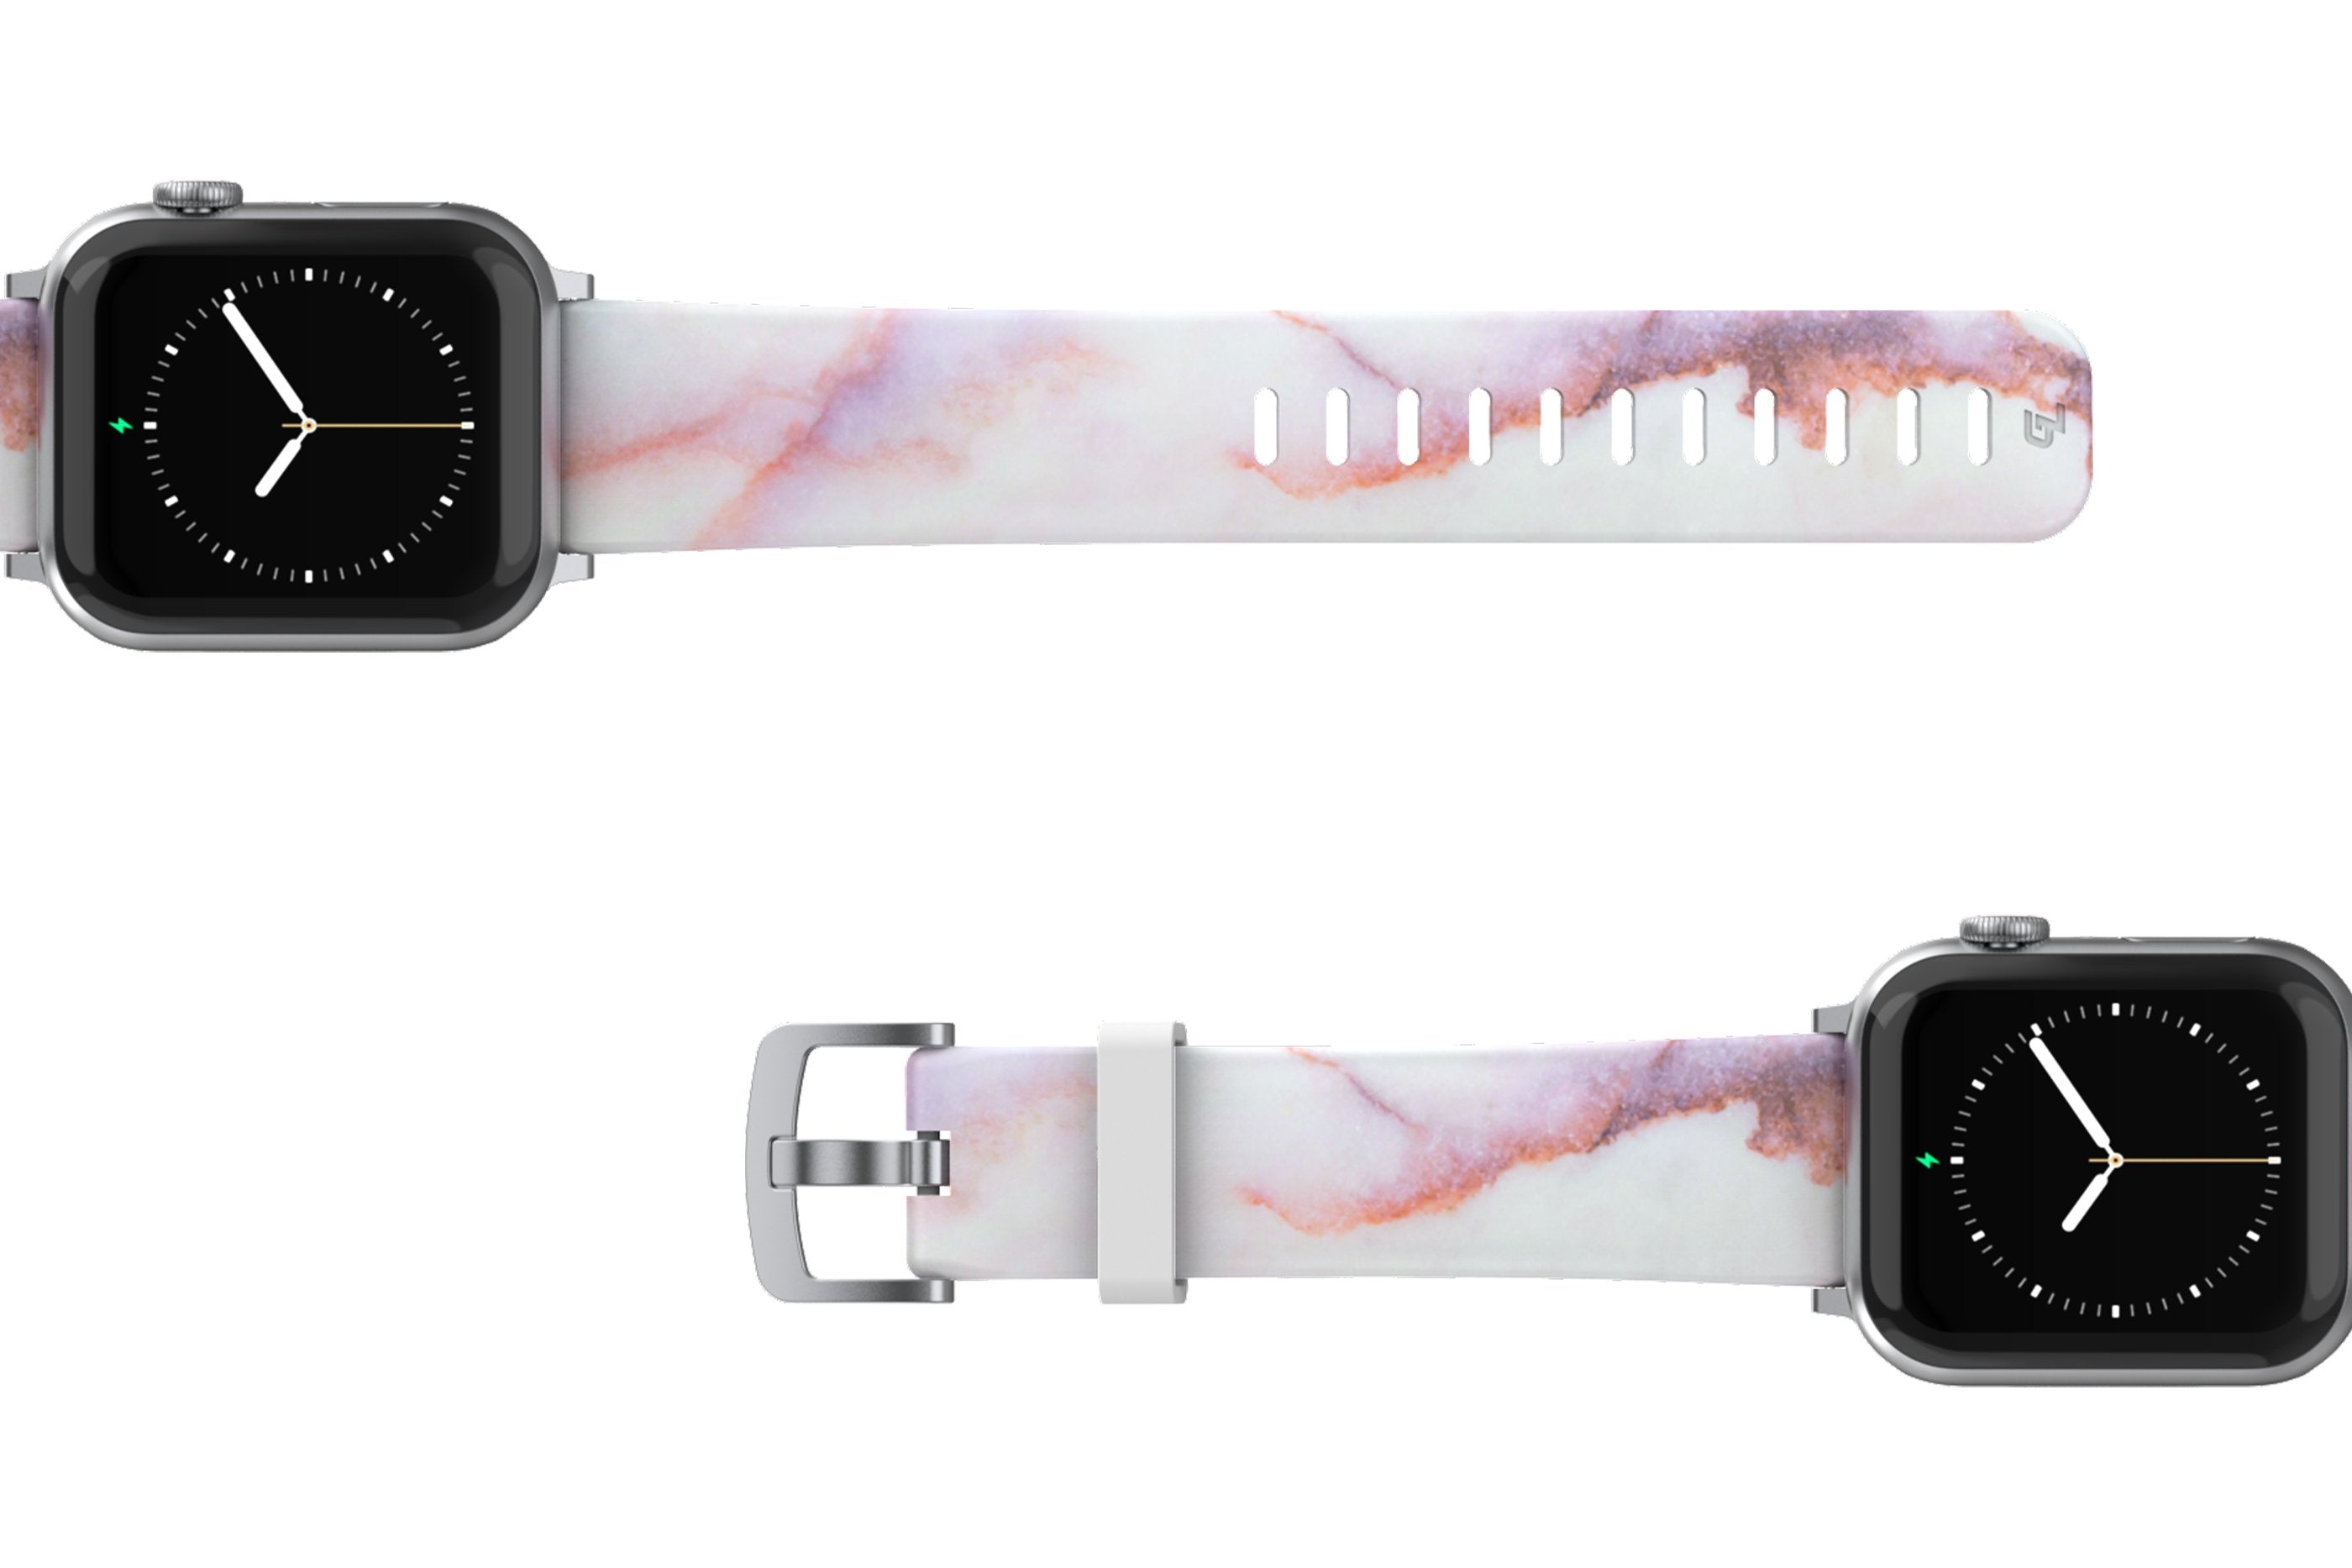 Carrera Marble Apple Watch Band with silver hardware viewed top down